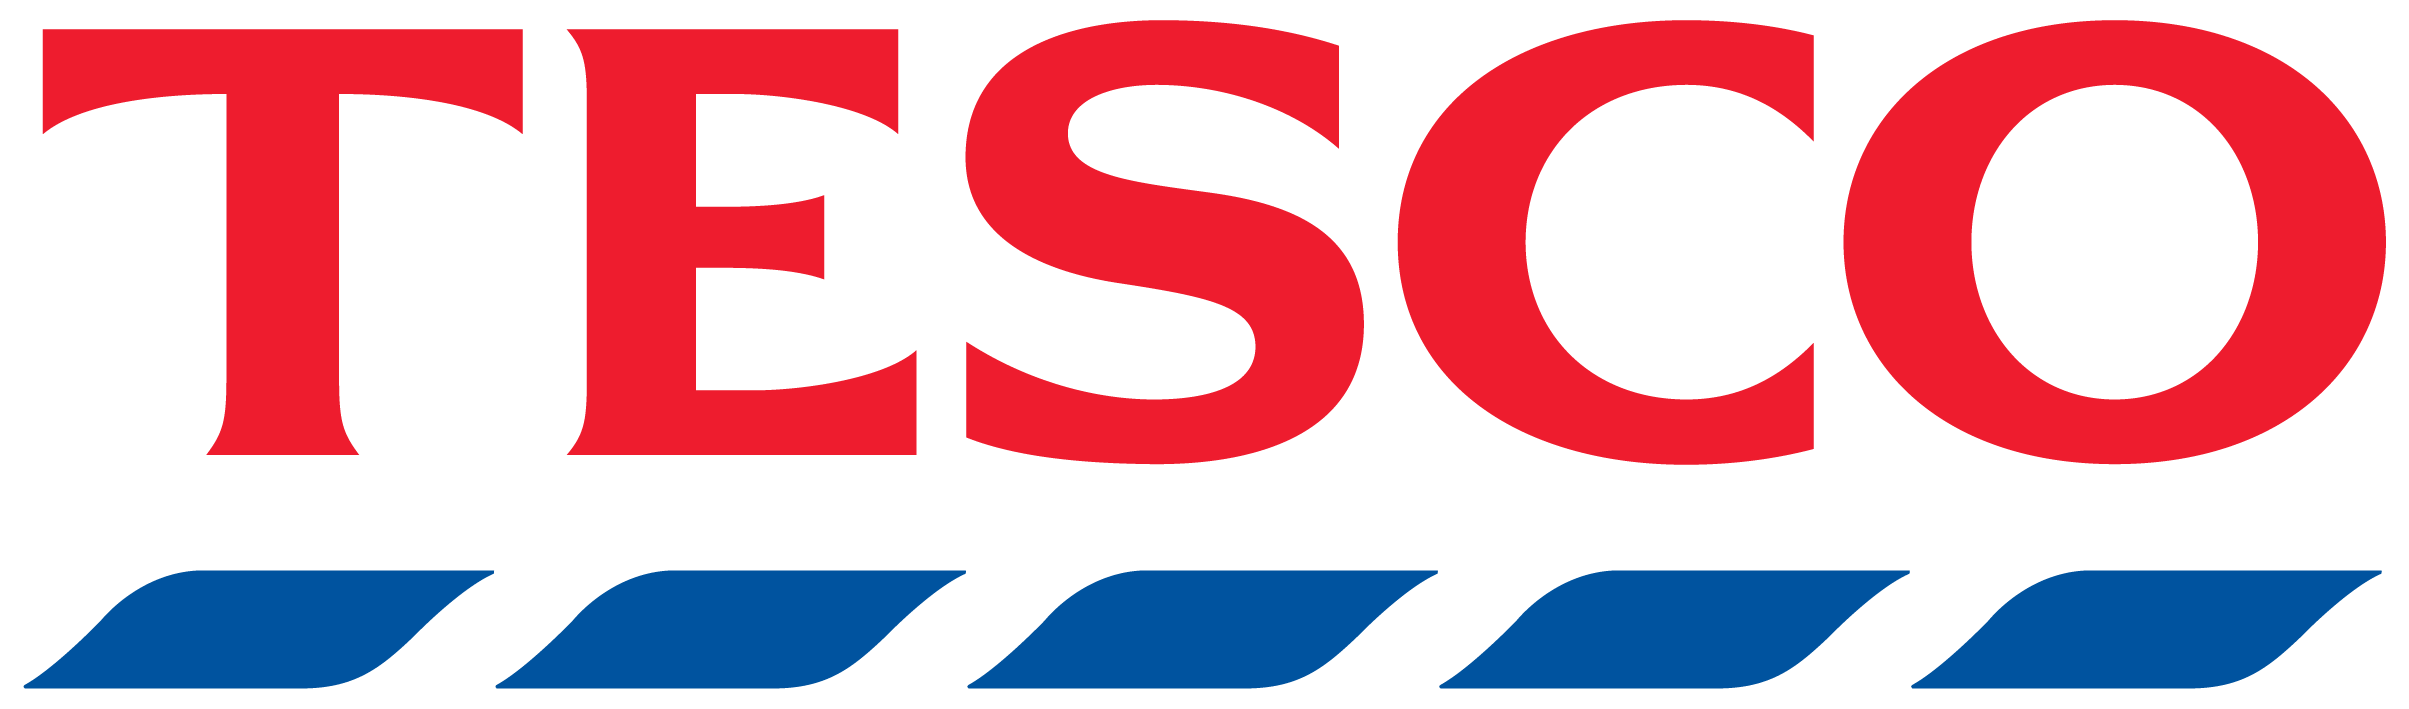 Tesco Home Panels - get free products and vouchers for Tesco